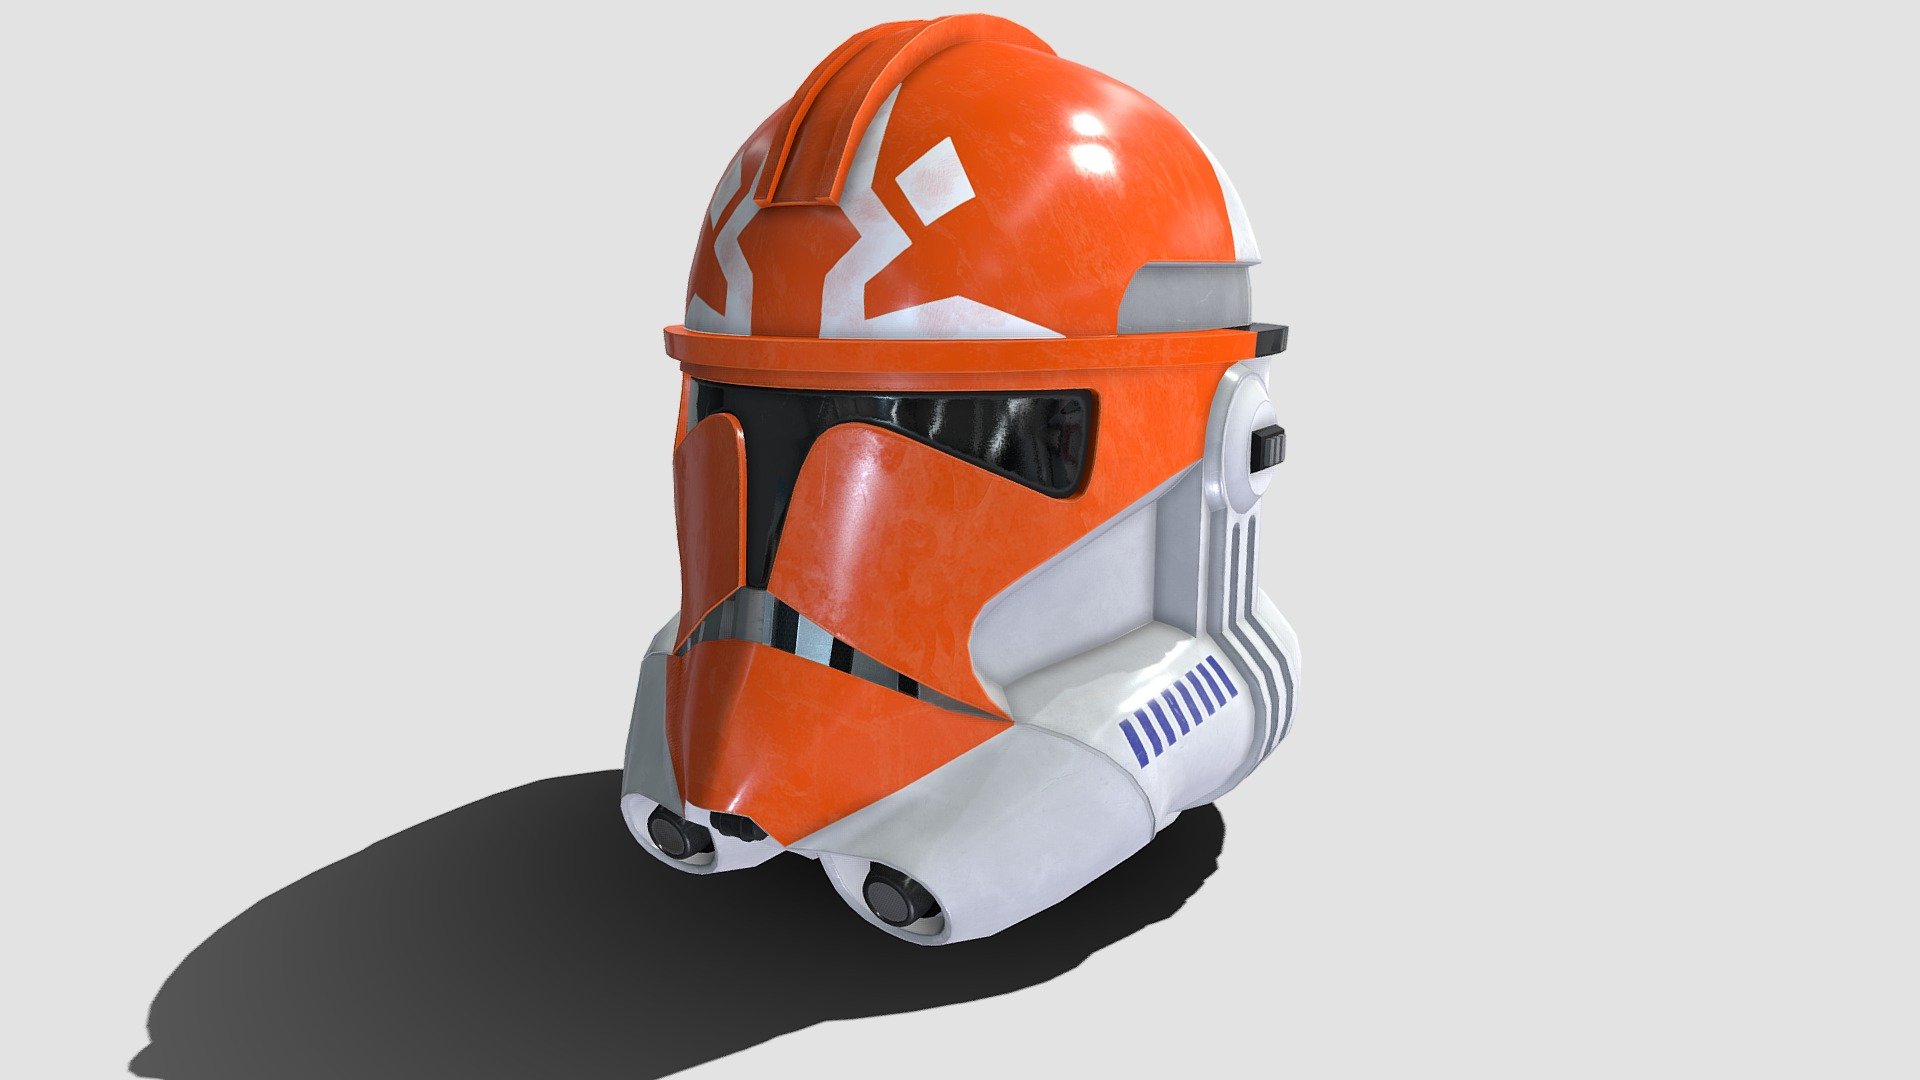 322nd Phase II Clone Trooper Helmet from The Clone Wars in the Revenge of the Sith modelled in Maya and textured in Substance Painter.

*New Model and Textures updated 14/10/23 - Star Wars - Phase II 322nd Clone Trooper Helmet - Buy Royalty Free 3D model by JD24 3d model